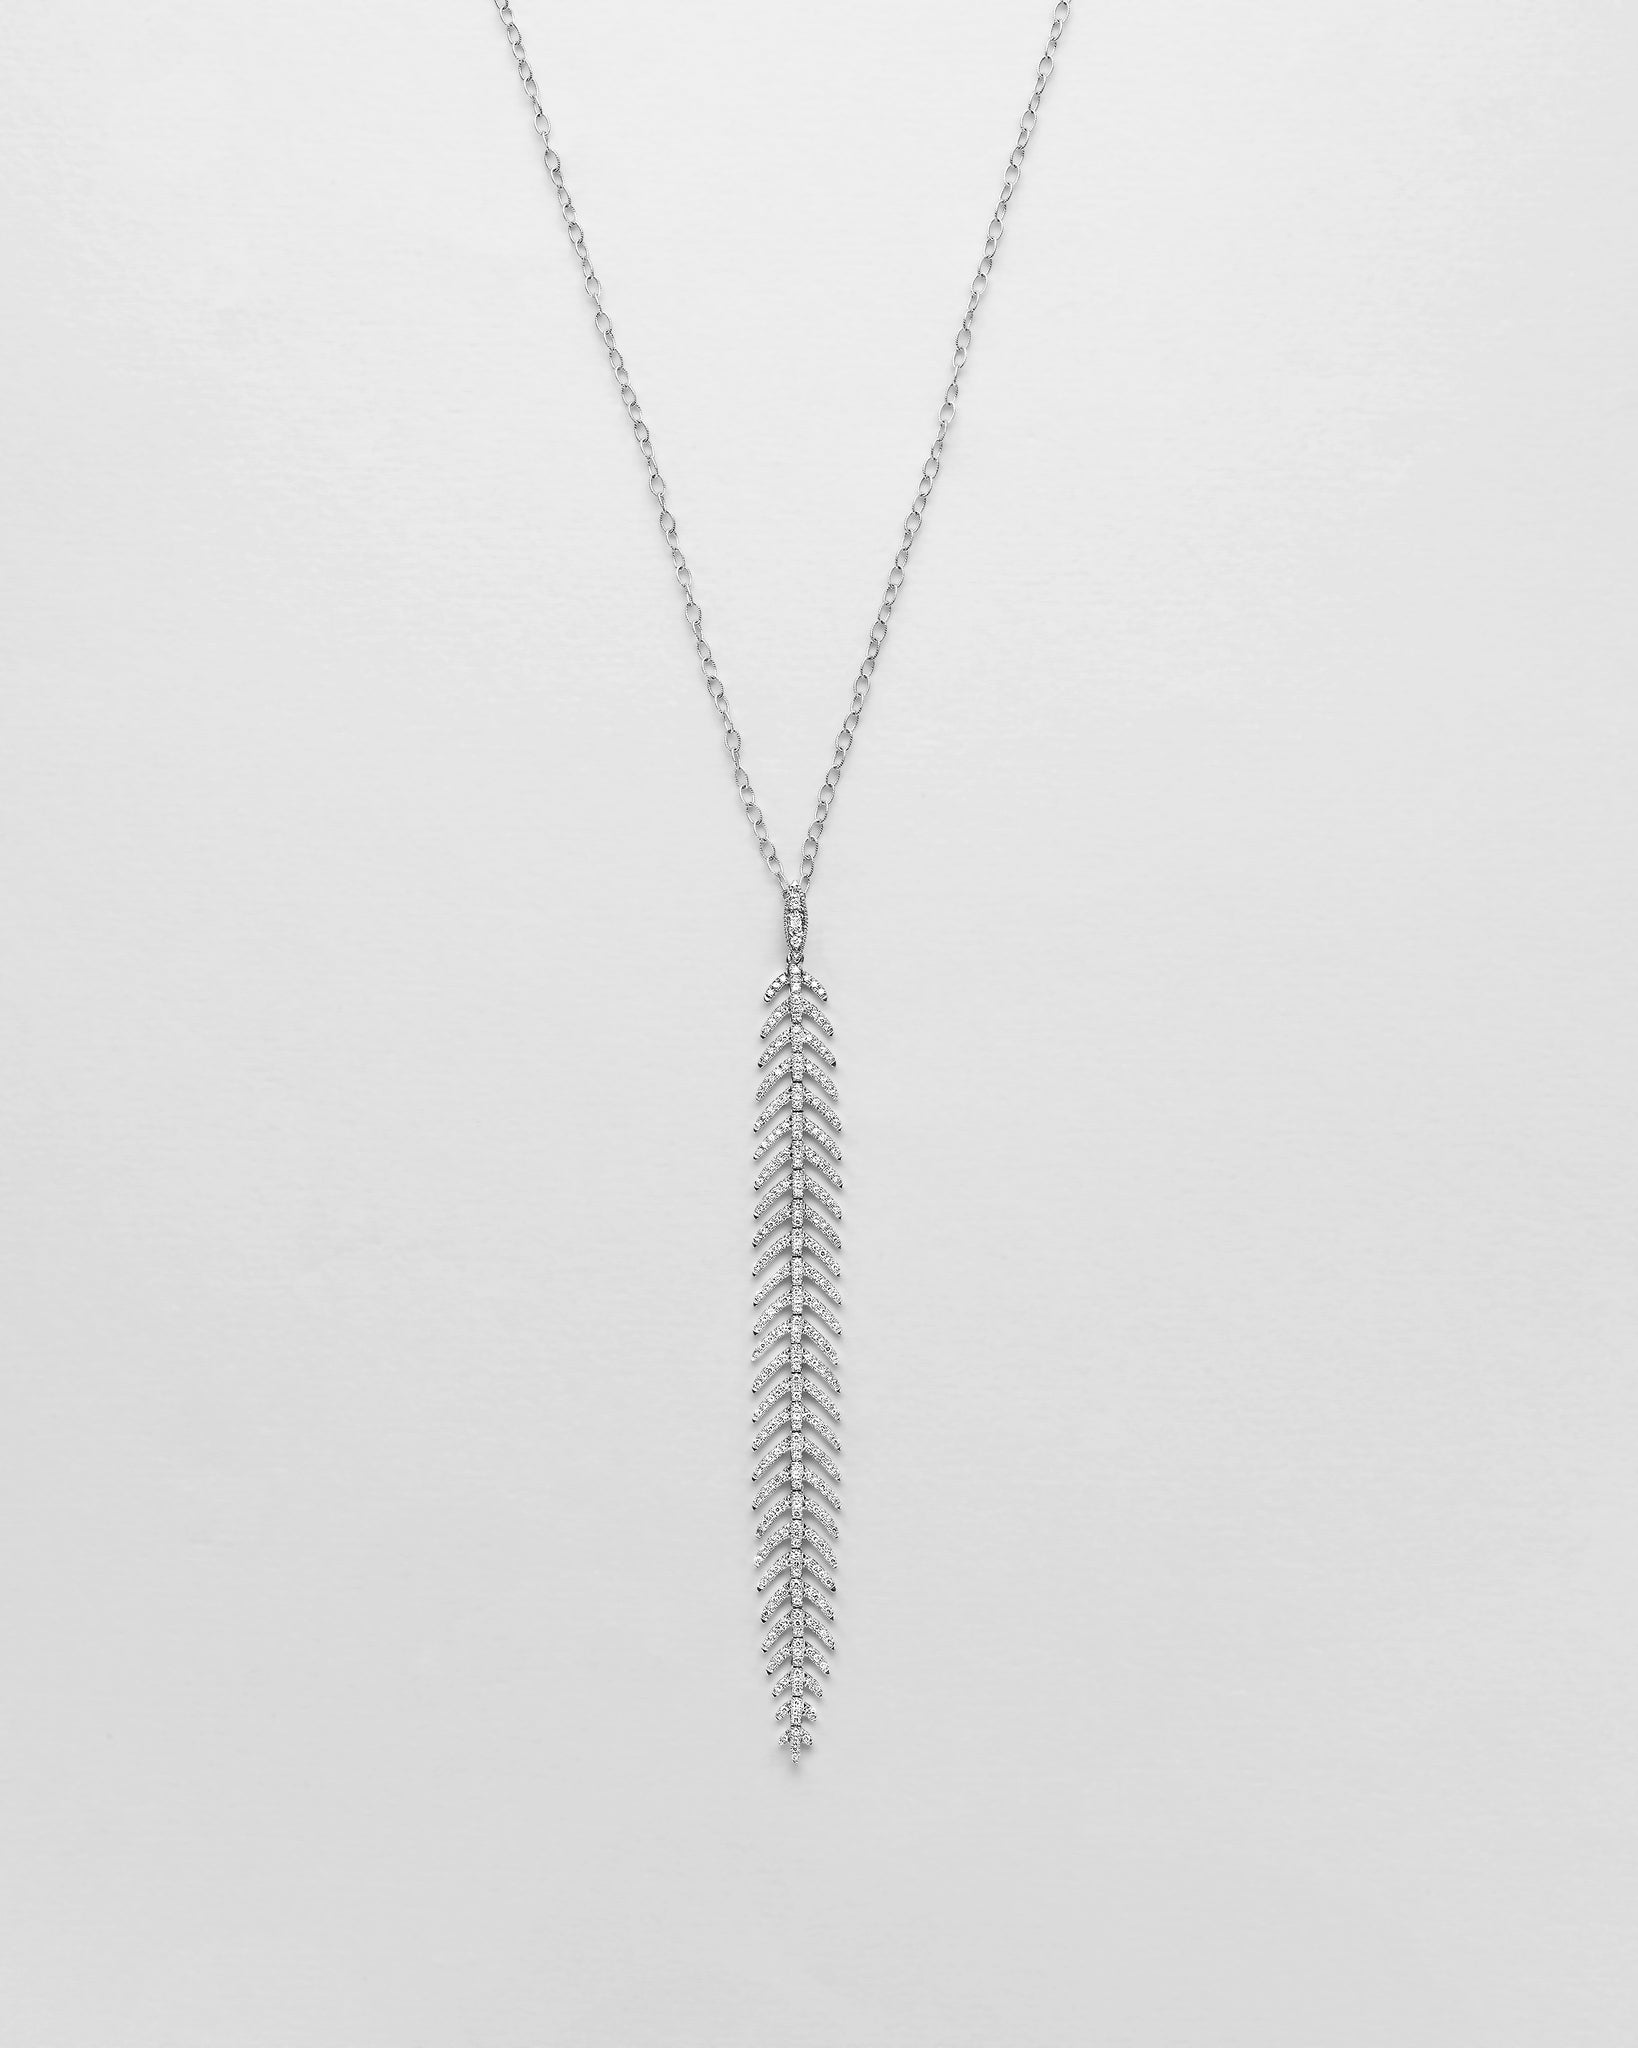 FINE FEATHER CHAIN NECKLACE